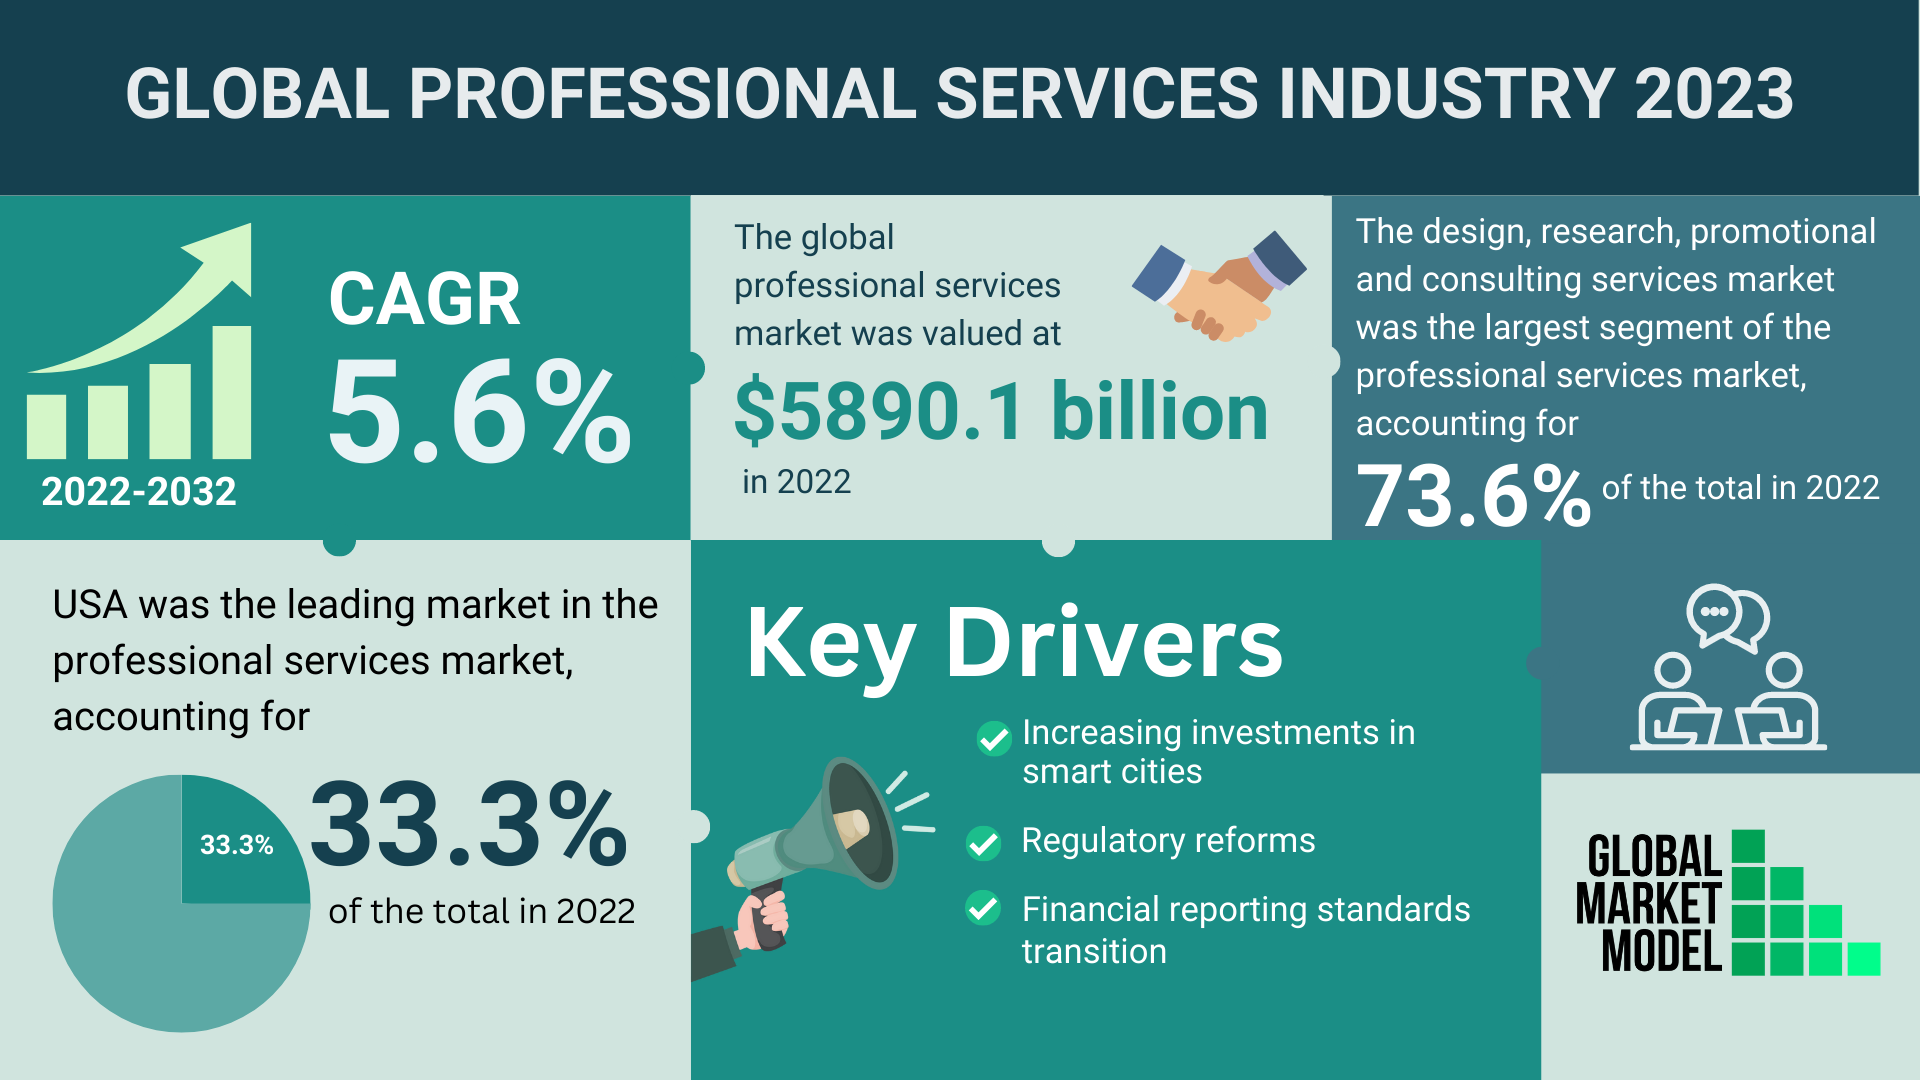 Global Professional Services Industry 2023